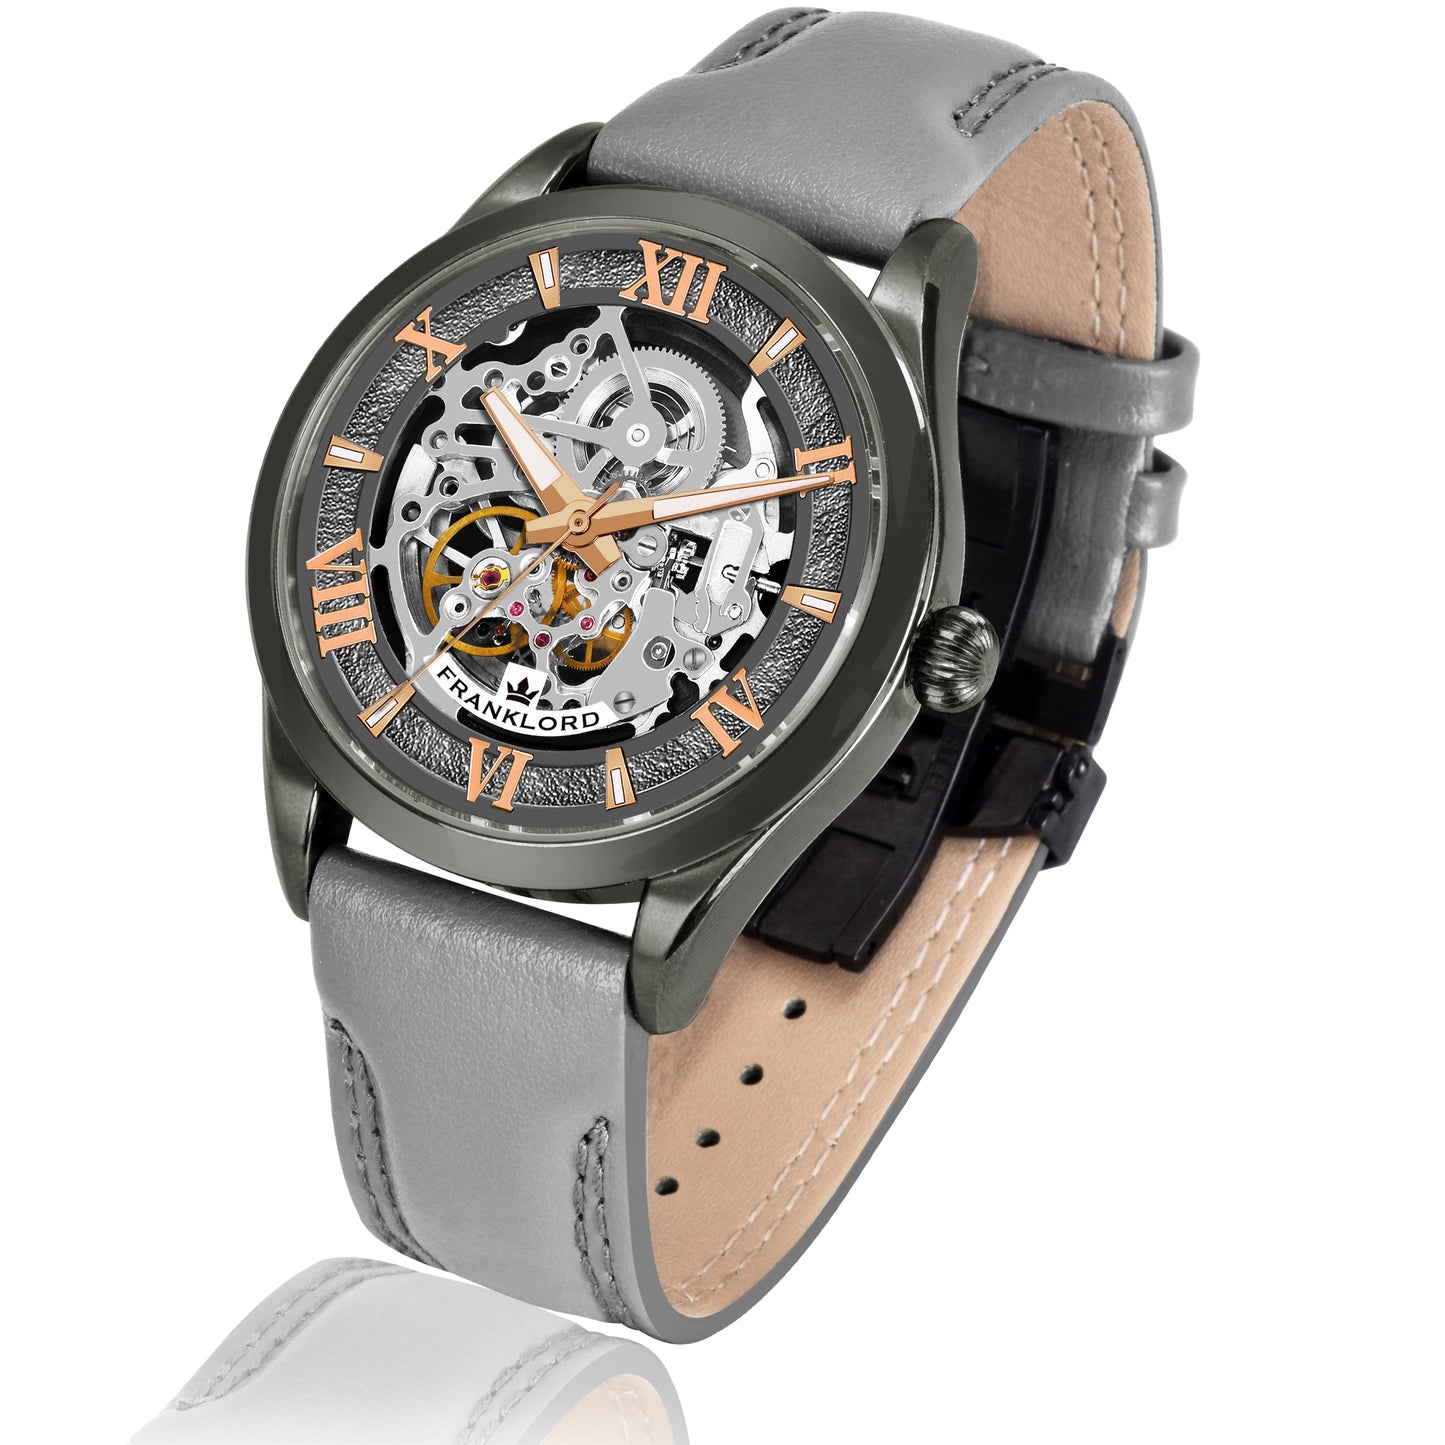 SELF WINDER - Grey - Mechanical Automatic Watch For Men  F-106 GTG 21